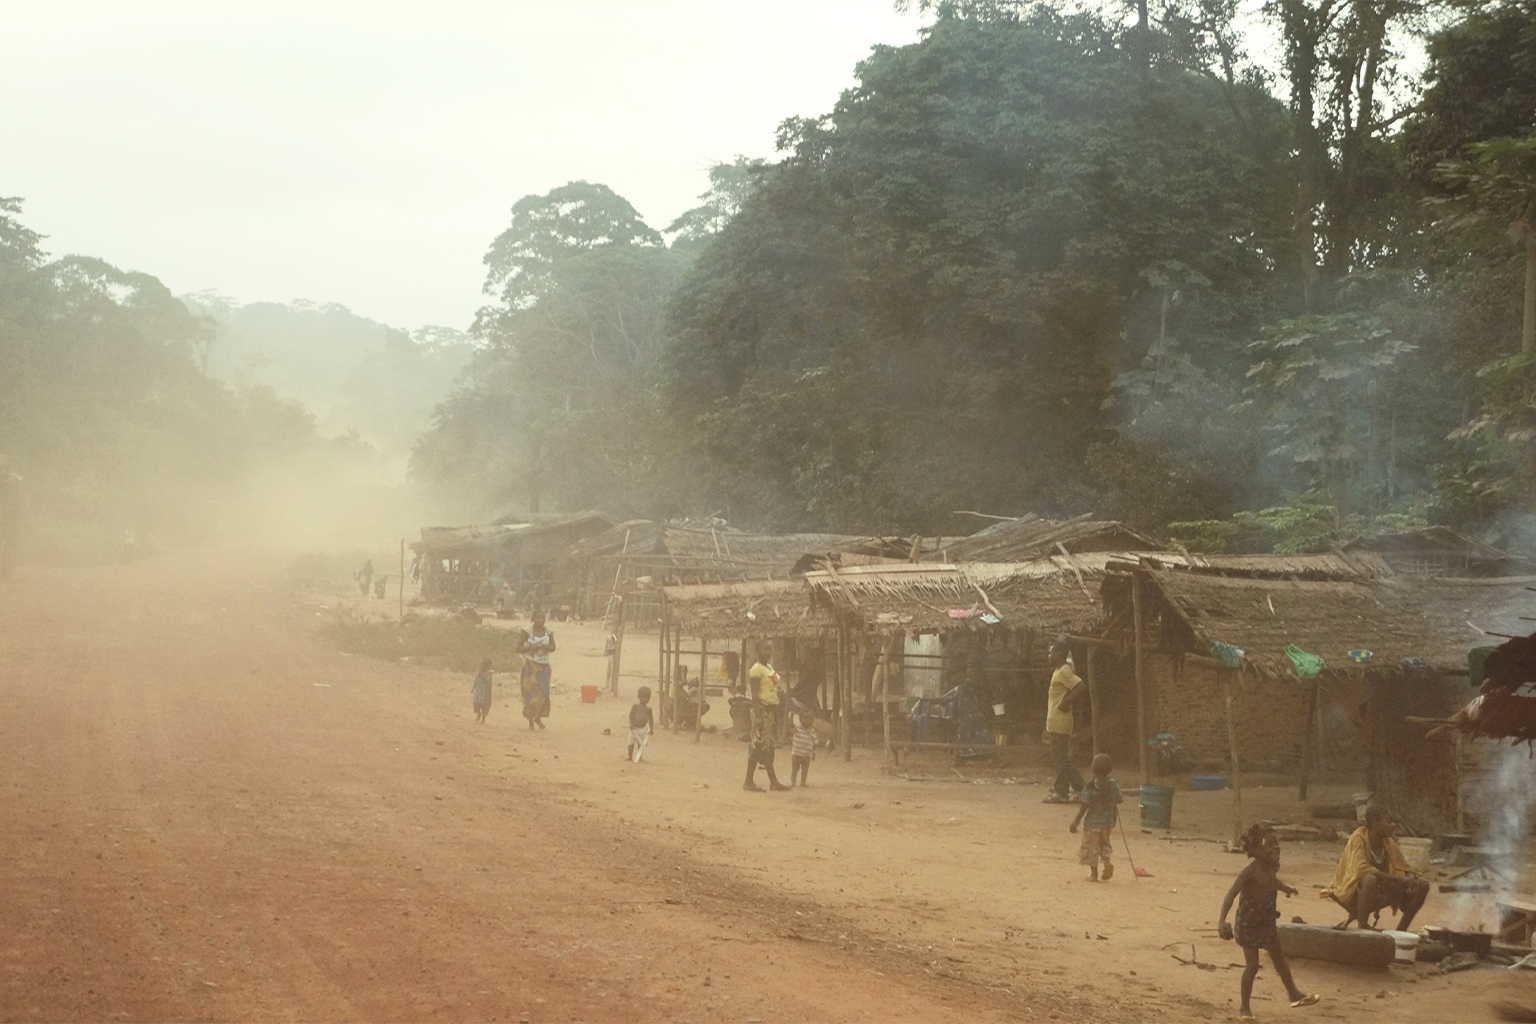 The Baka community of Makouagonda, whose ancestral land was taken for Odzala-Kokoua National Park. They now live by the side of the road. 